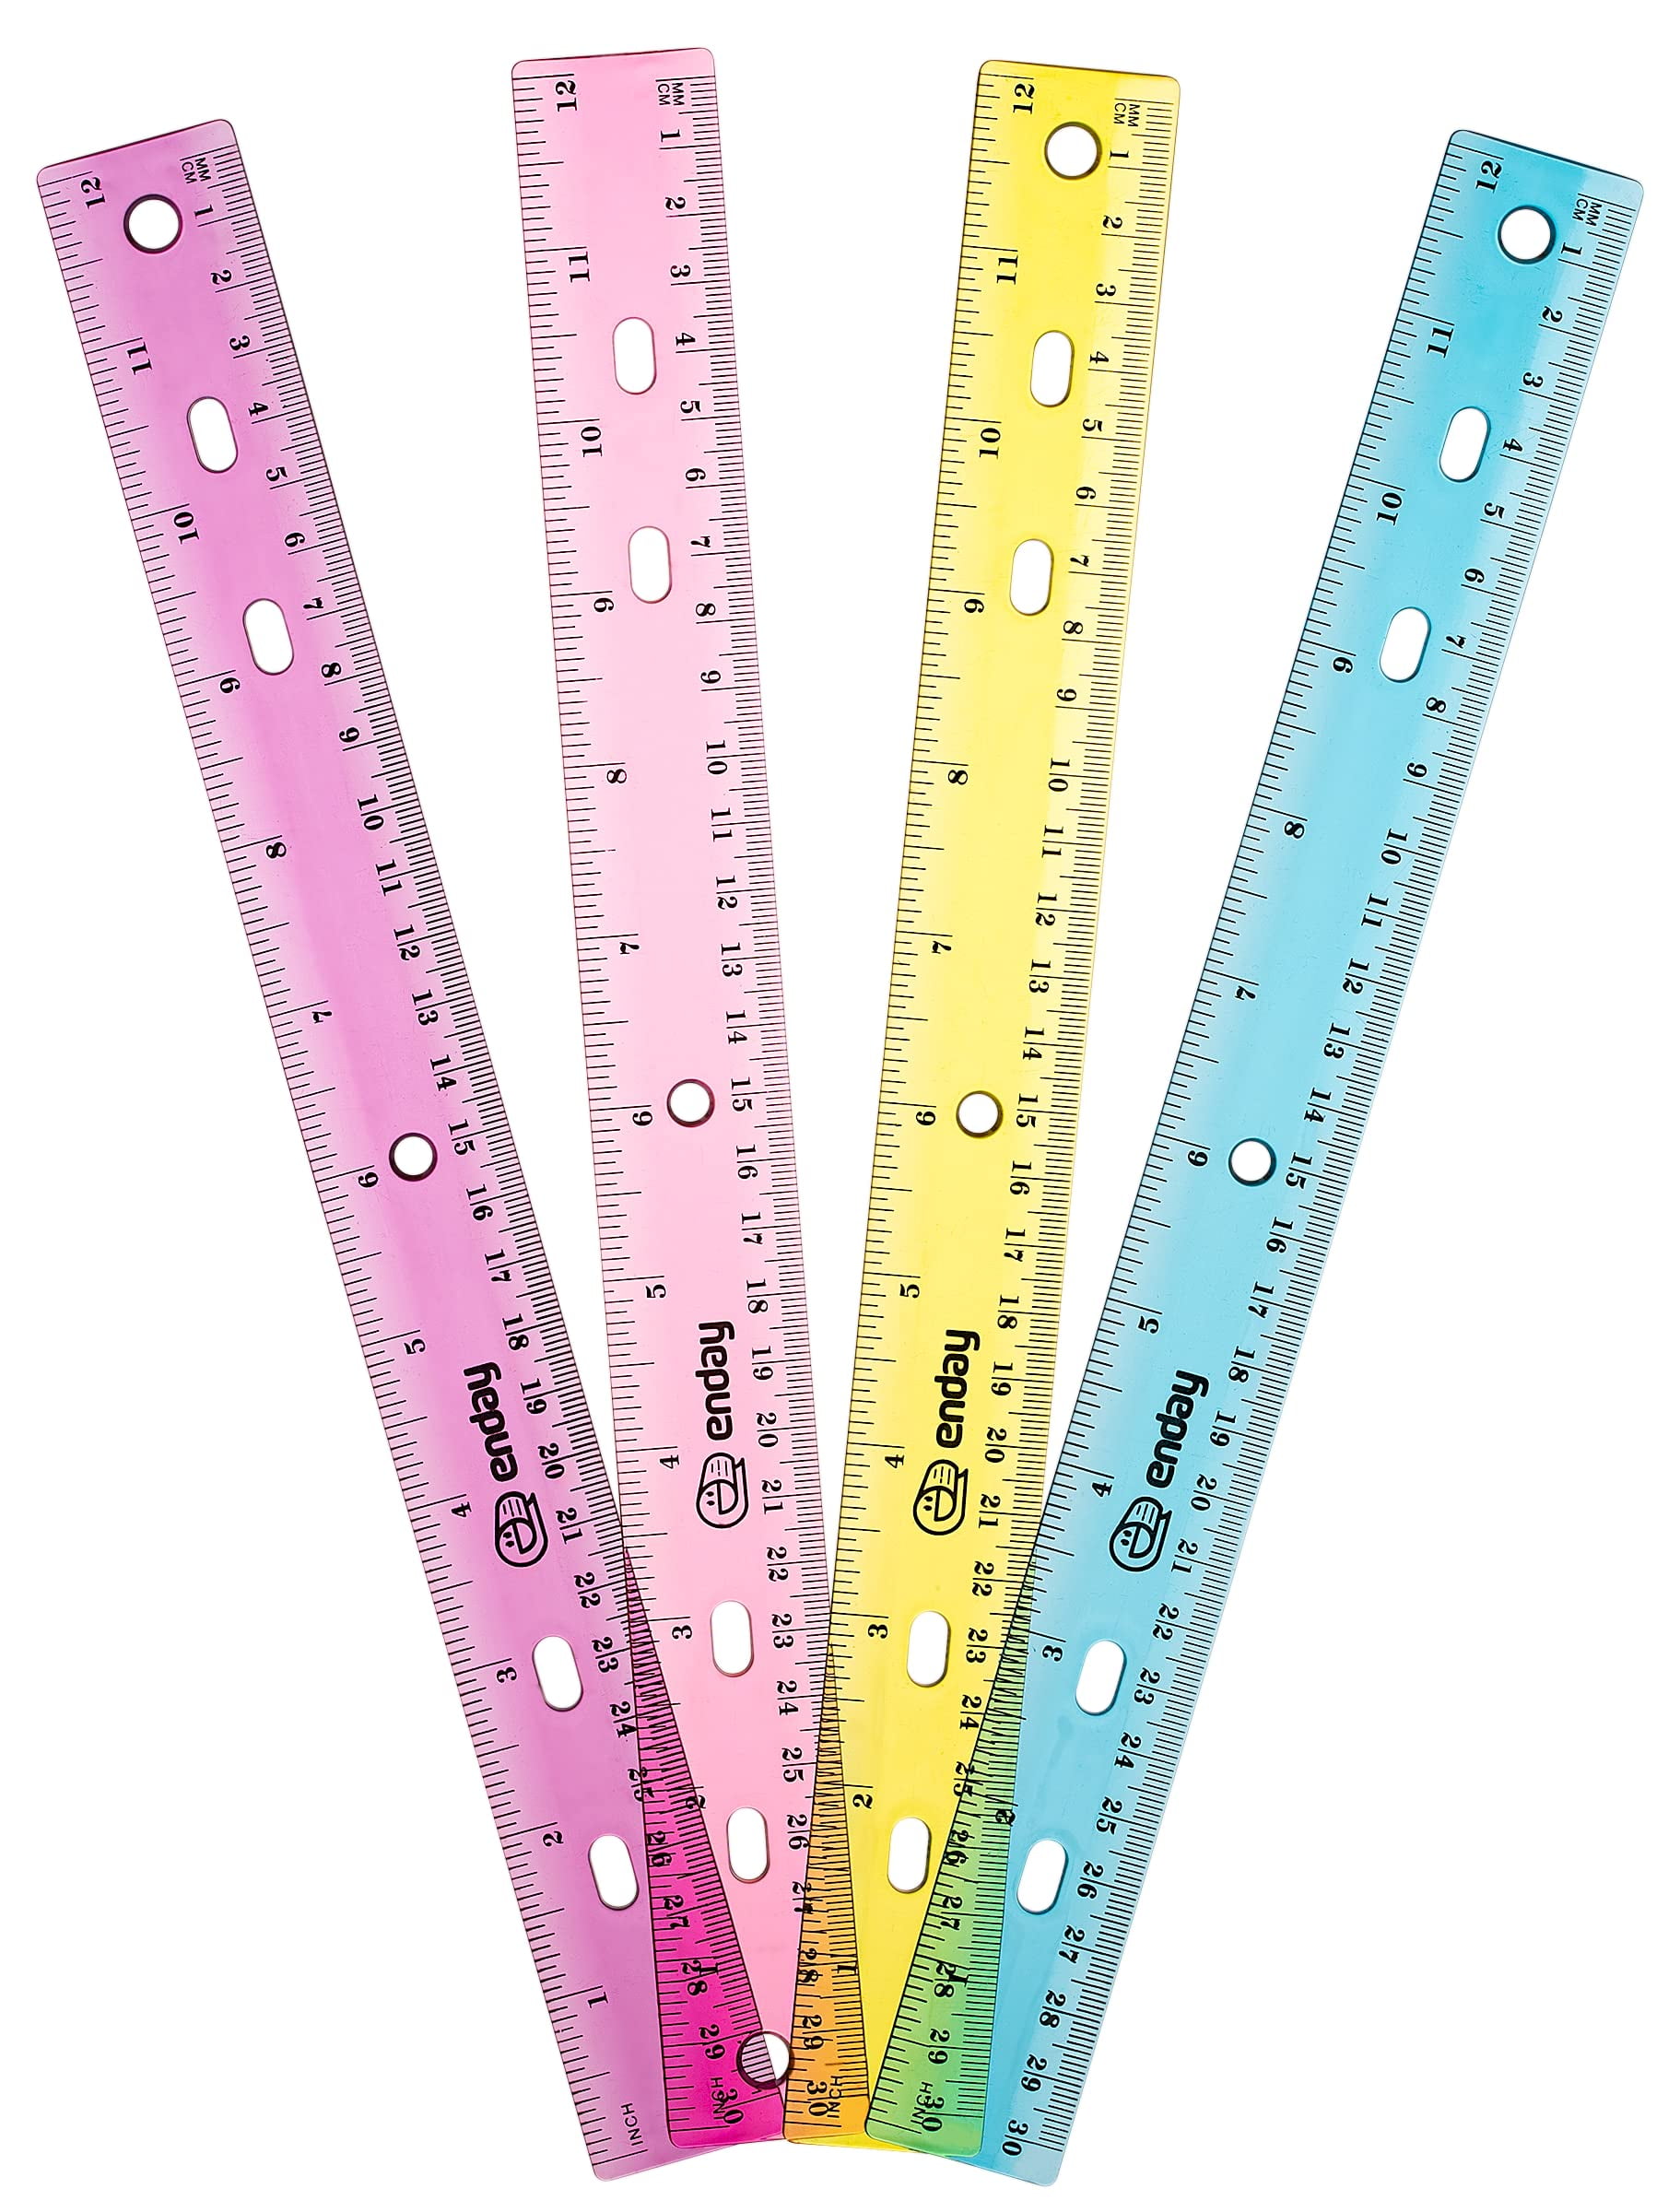 Ruler 6 inch - Clear Rulers - Assorted Colors - 12 Count Rulers for Kids, Small Ruler Metric and Inches, Rulers Bulk for Classroom, 6 in Ruler